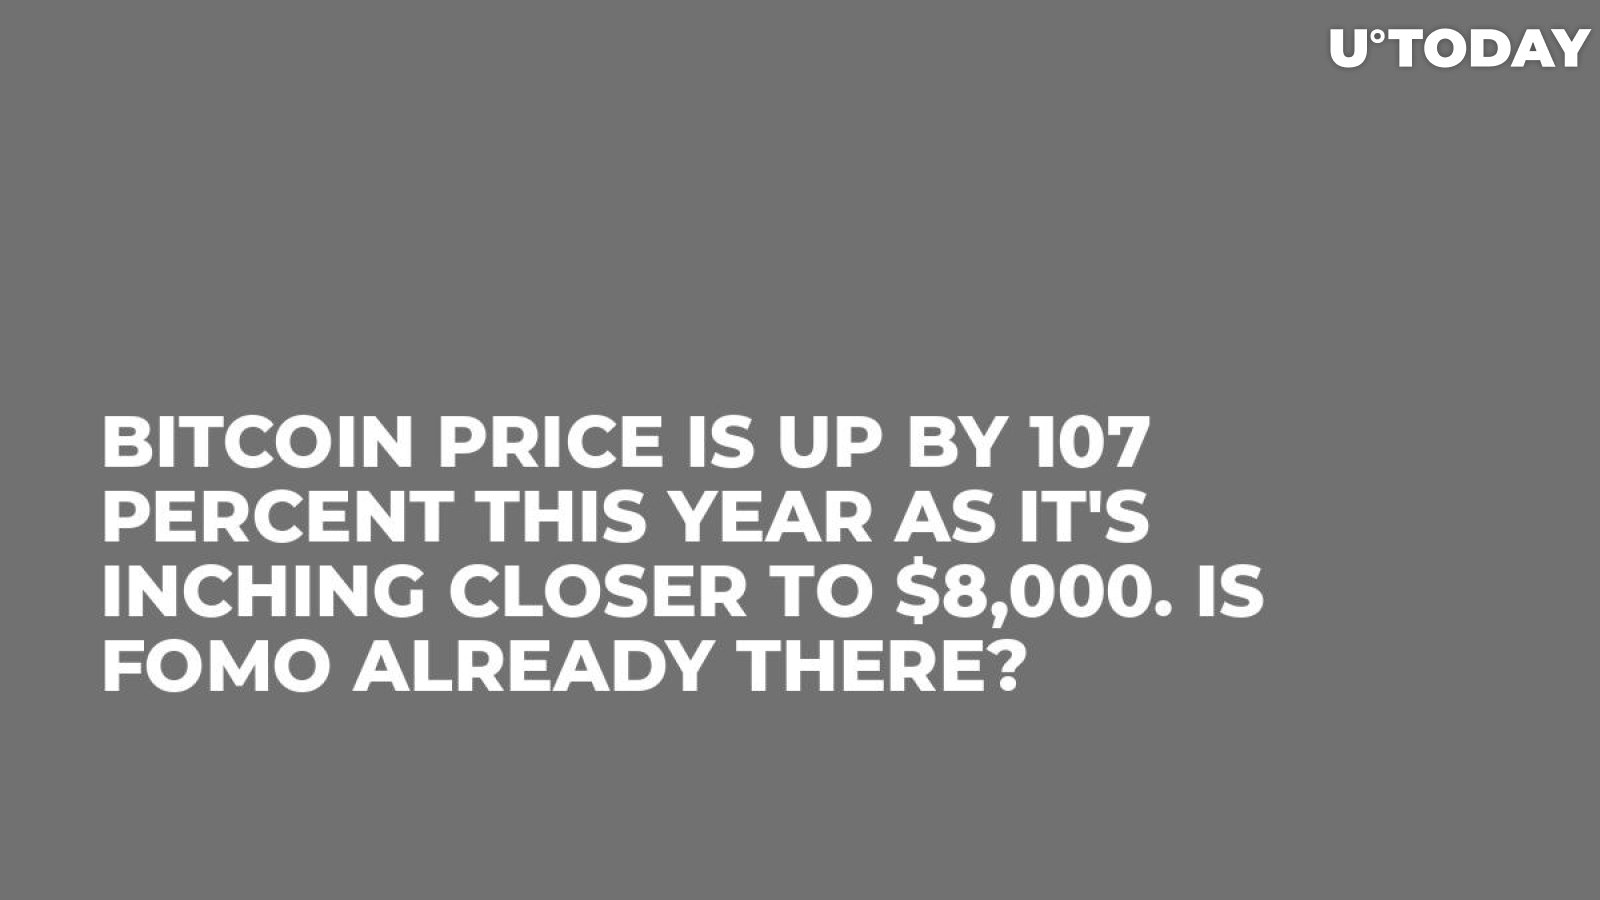 Bitcoin Price Is up by 107 Percent This Year as It's Inching Closer to $8,000. Is FOMO Already There?